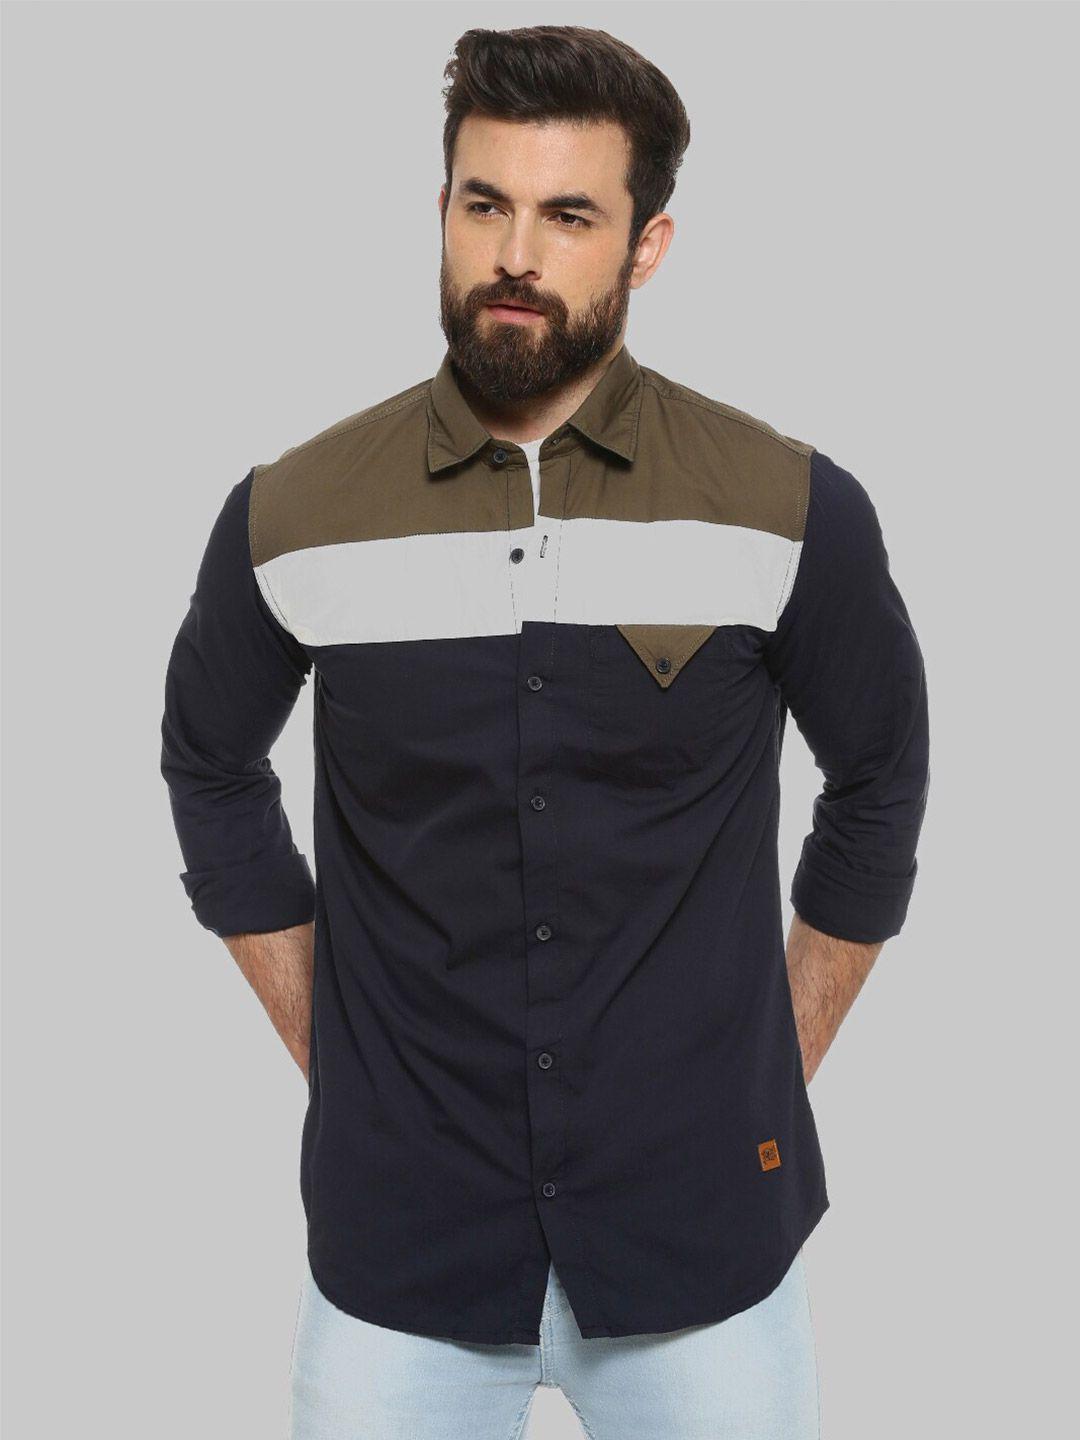 campus sutra blue & olive striped classic fit cotton casual shirt